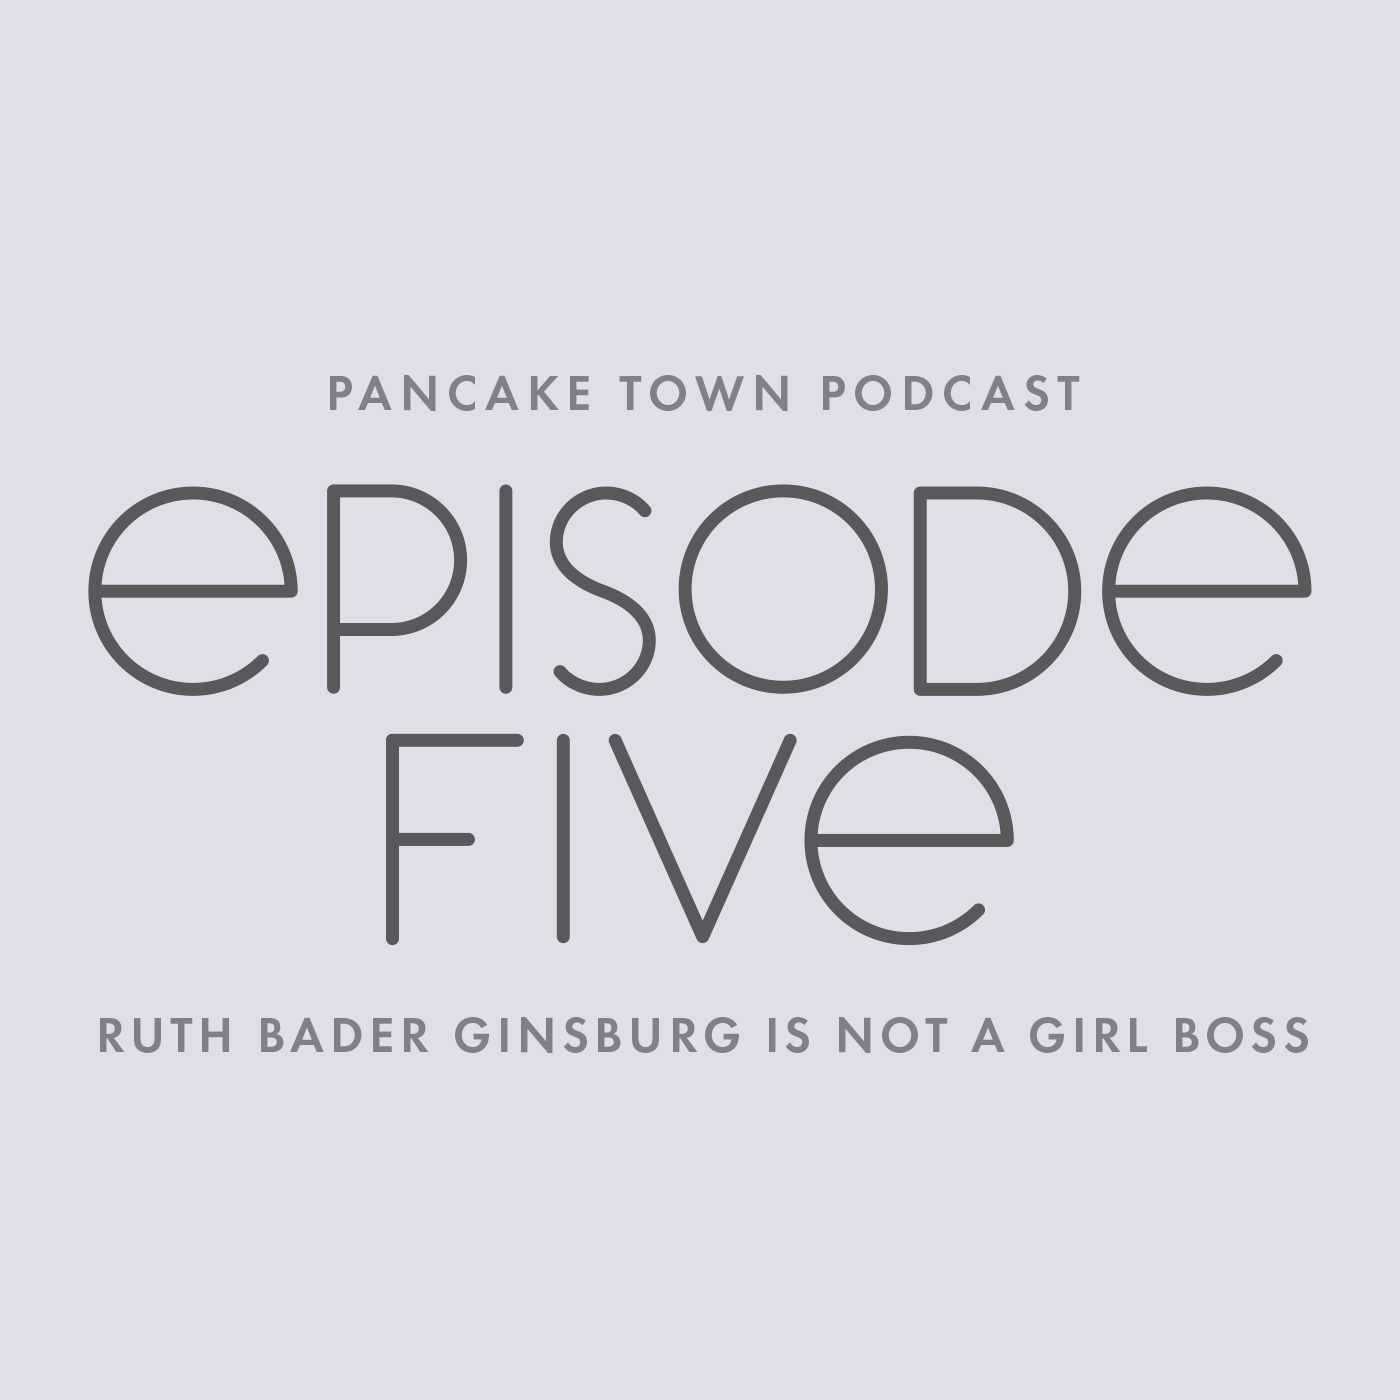 Episode 5 - Ruth Bader Ginsburg is not a Girl Boss